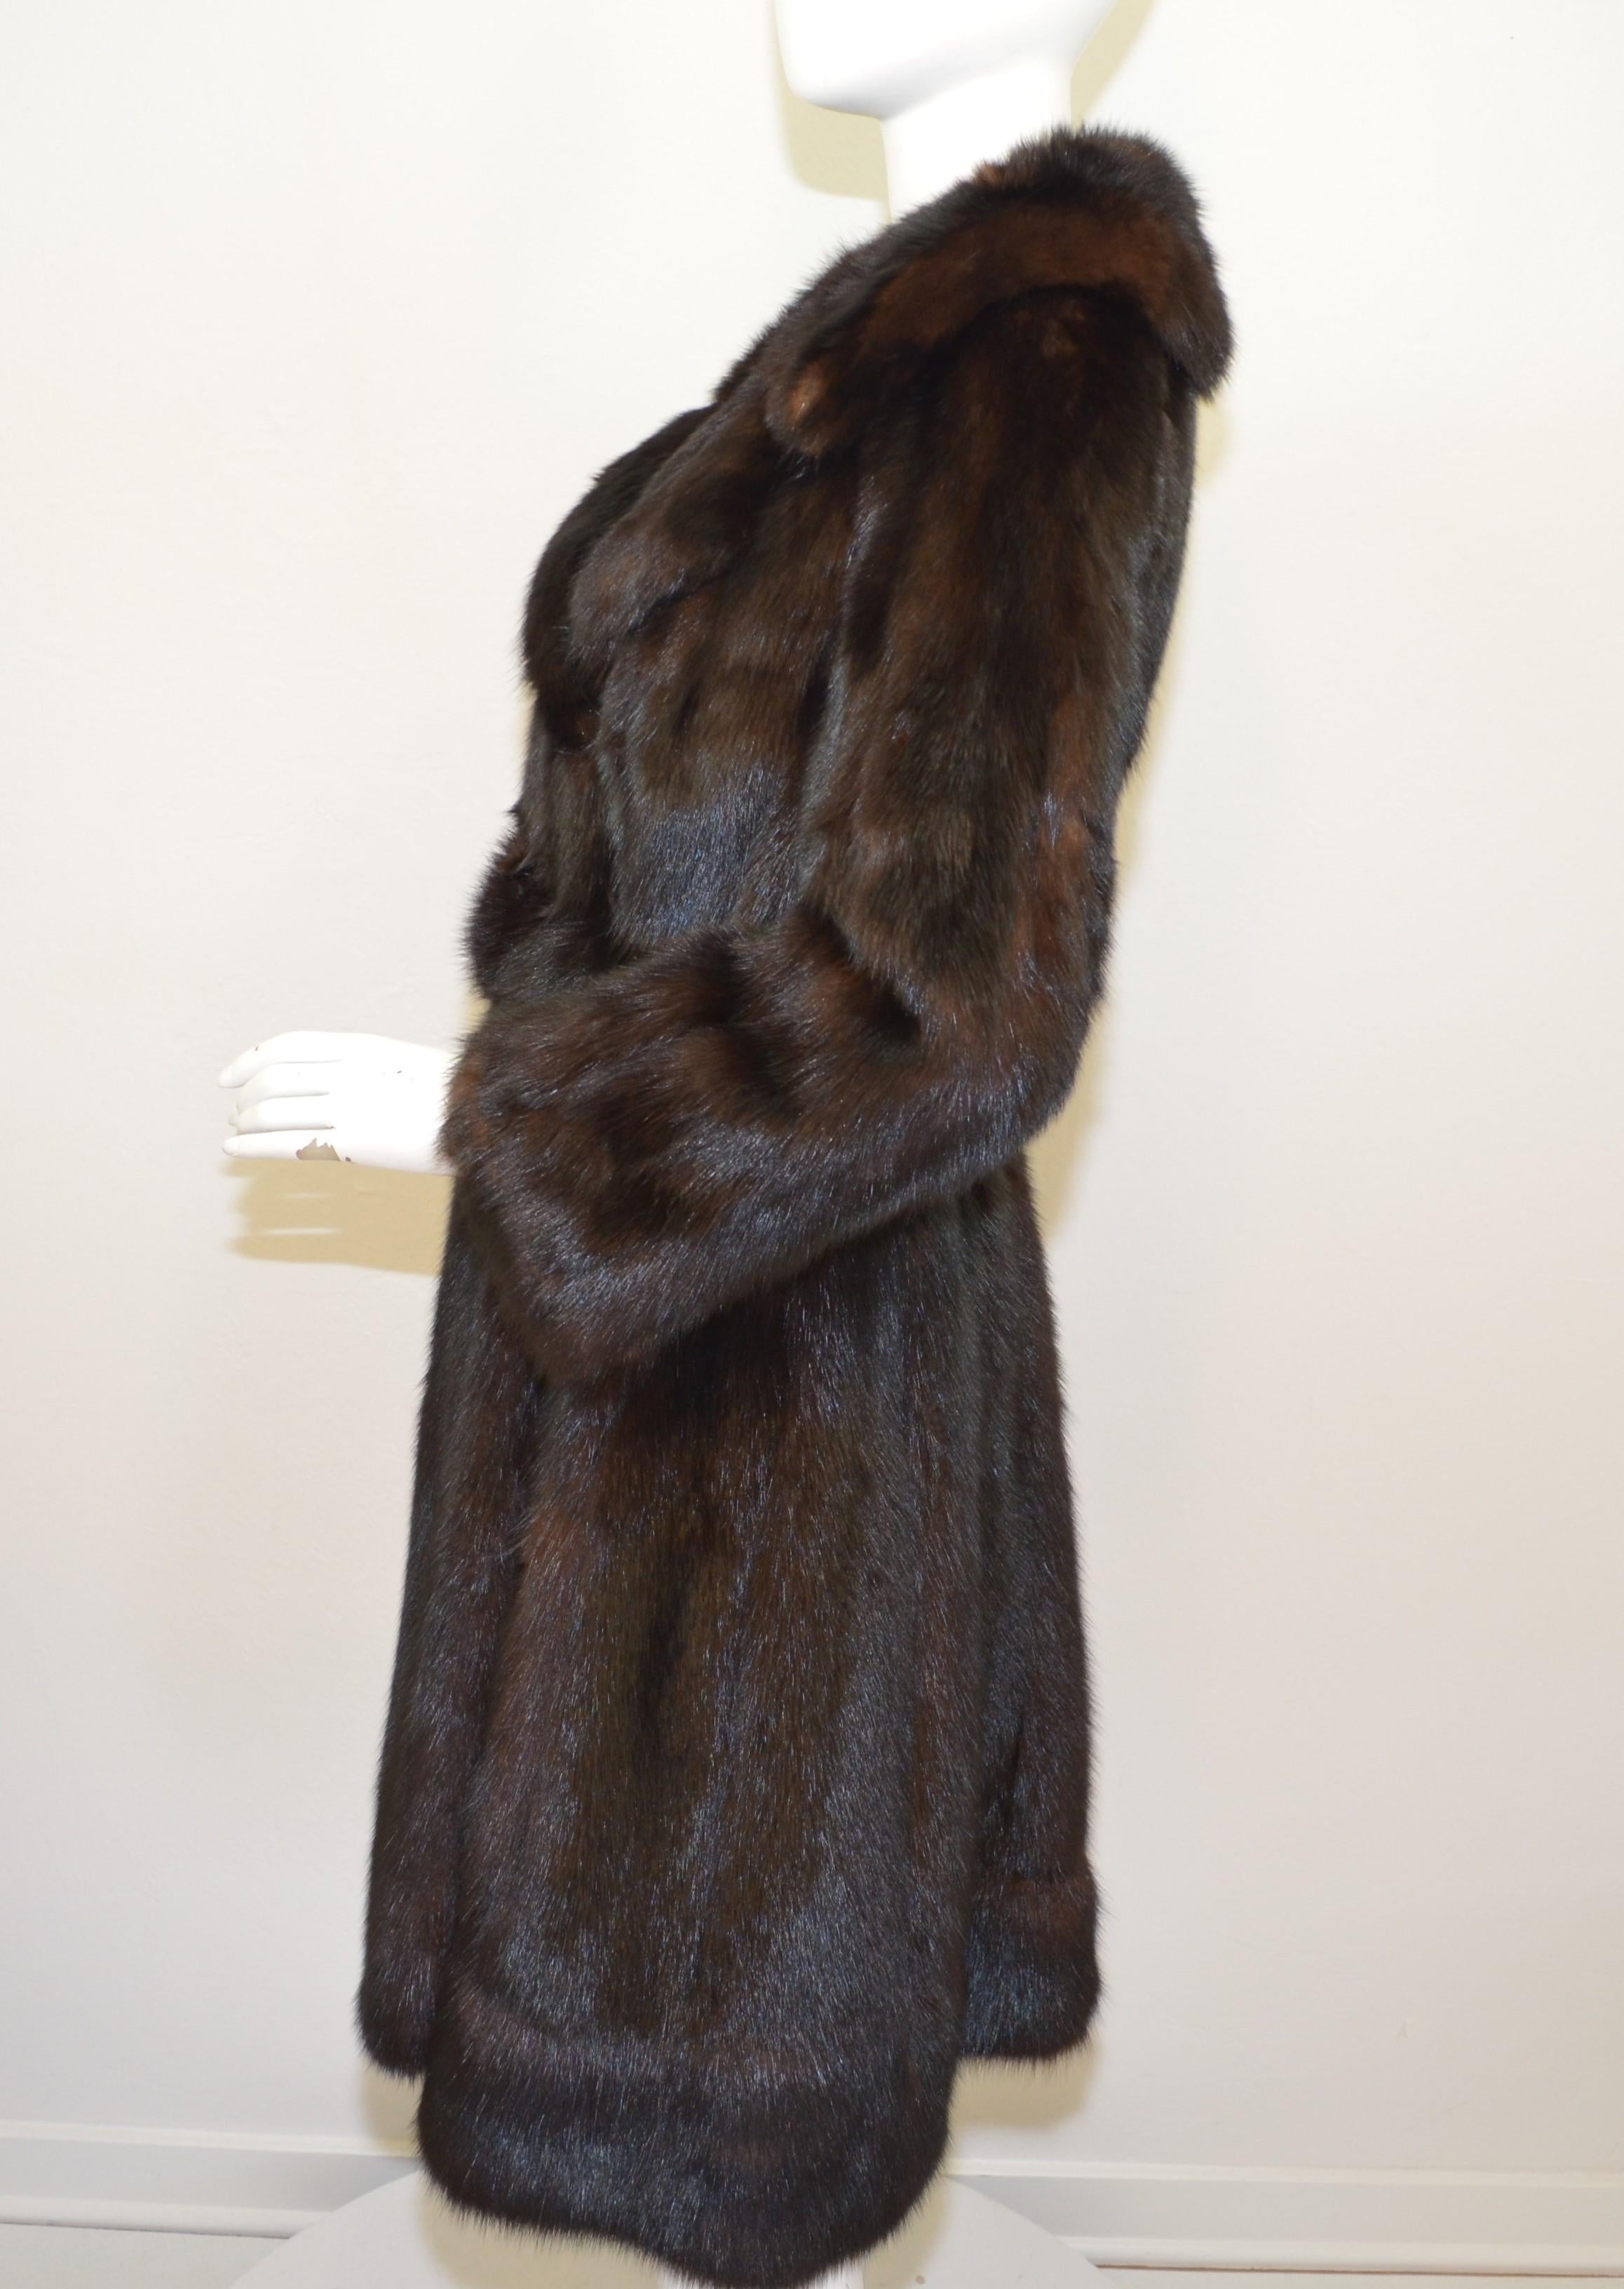 Vintage Sable Fur Belted Coat -- brown sable fur coat features a large collar with a belted closure. Coat has an embroidered design to the lining as pictured. Coat is in excellent condition with no flaws to be mentioned.

Measurements:
Bust